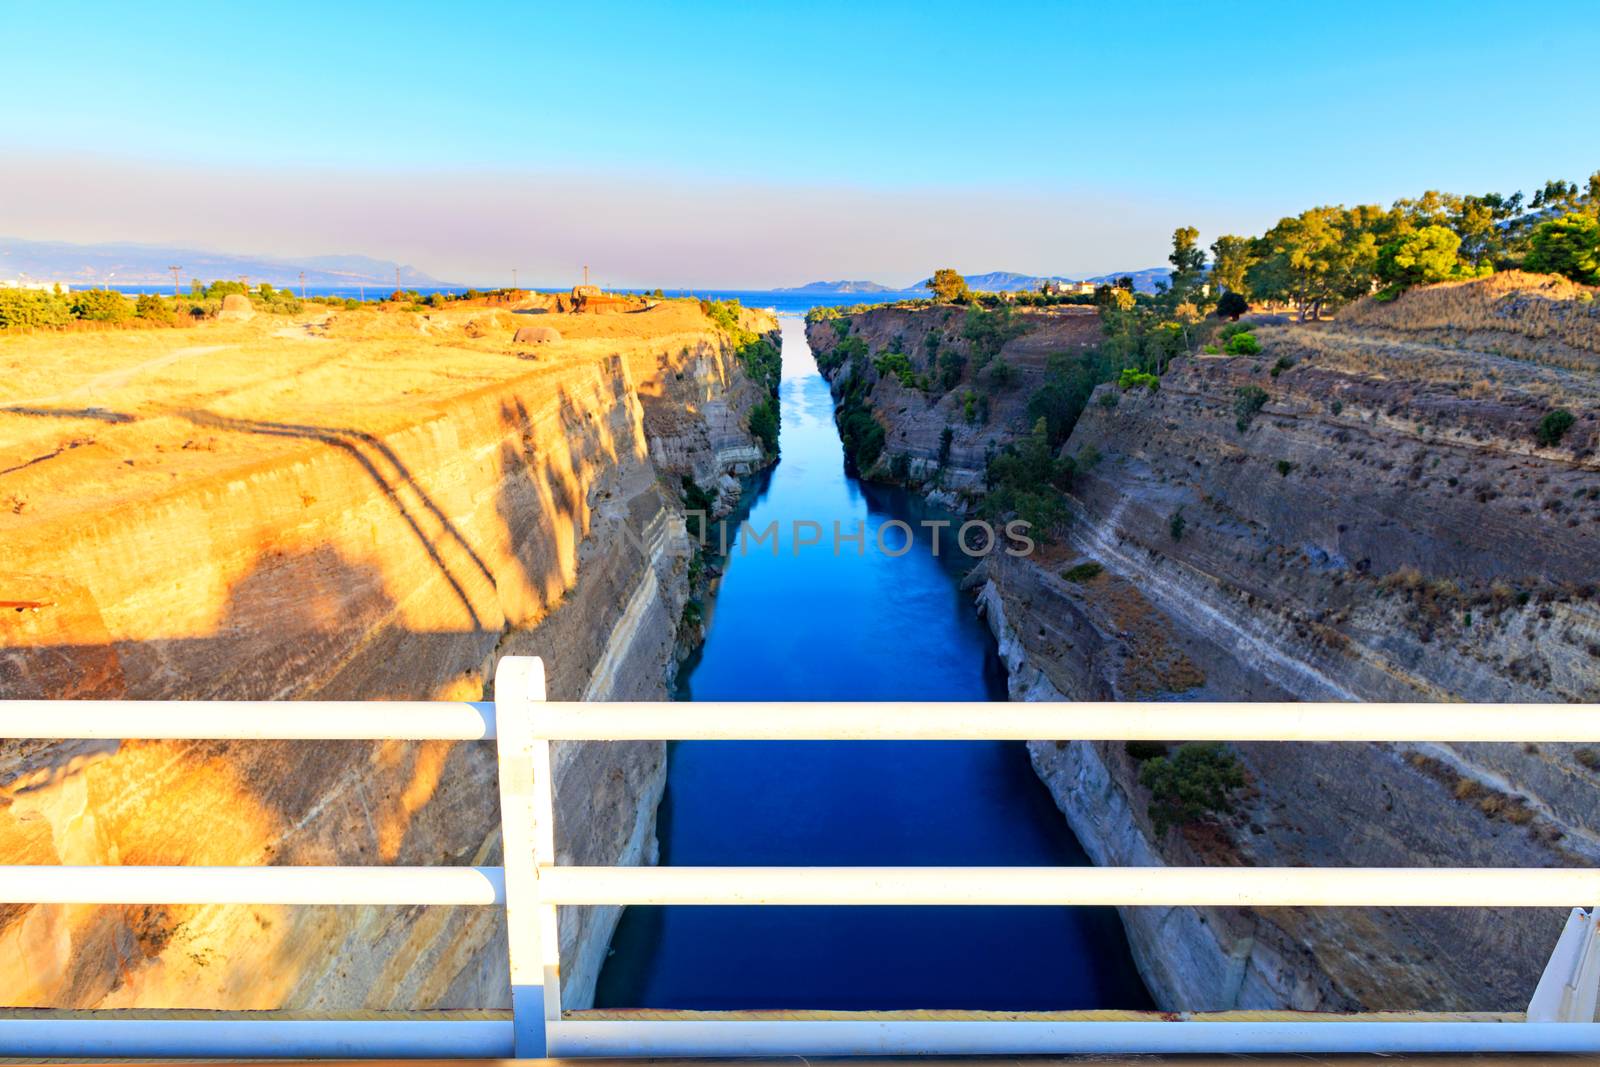 The Corinth Canal on a morning summer day illuminates the bright rising sun of Greece, a view of the Gulf of Corinth from the height of a pedestrian bridge.